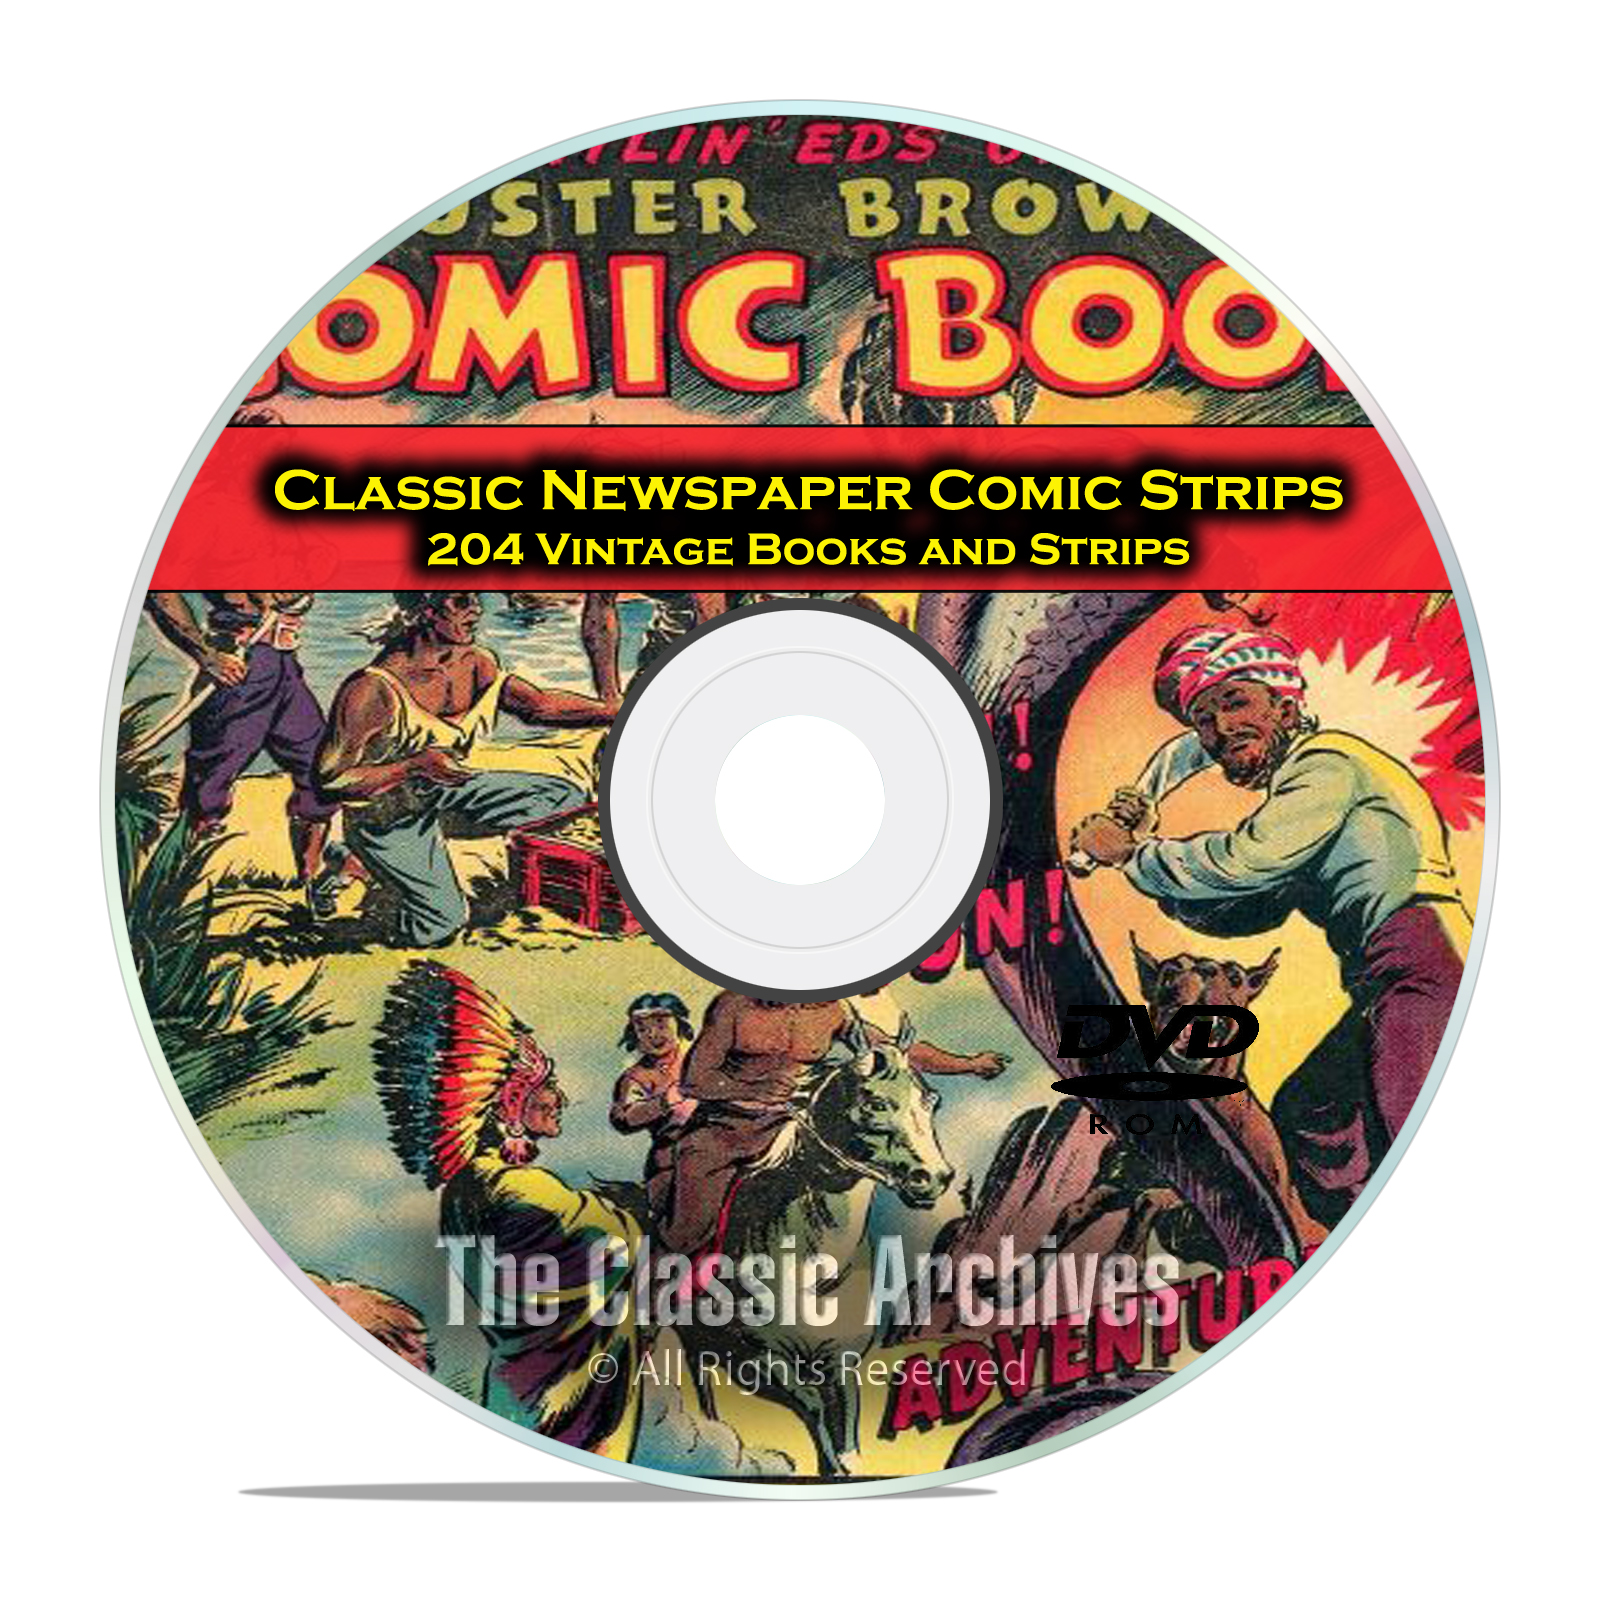 Classic Newspaper Comic Strips, Buster Brown, Nemo, Golden Age Comics DVD - Click Image to Close